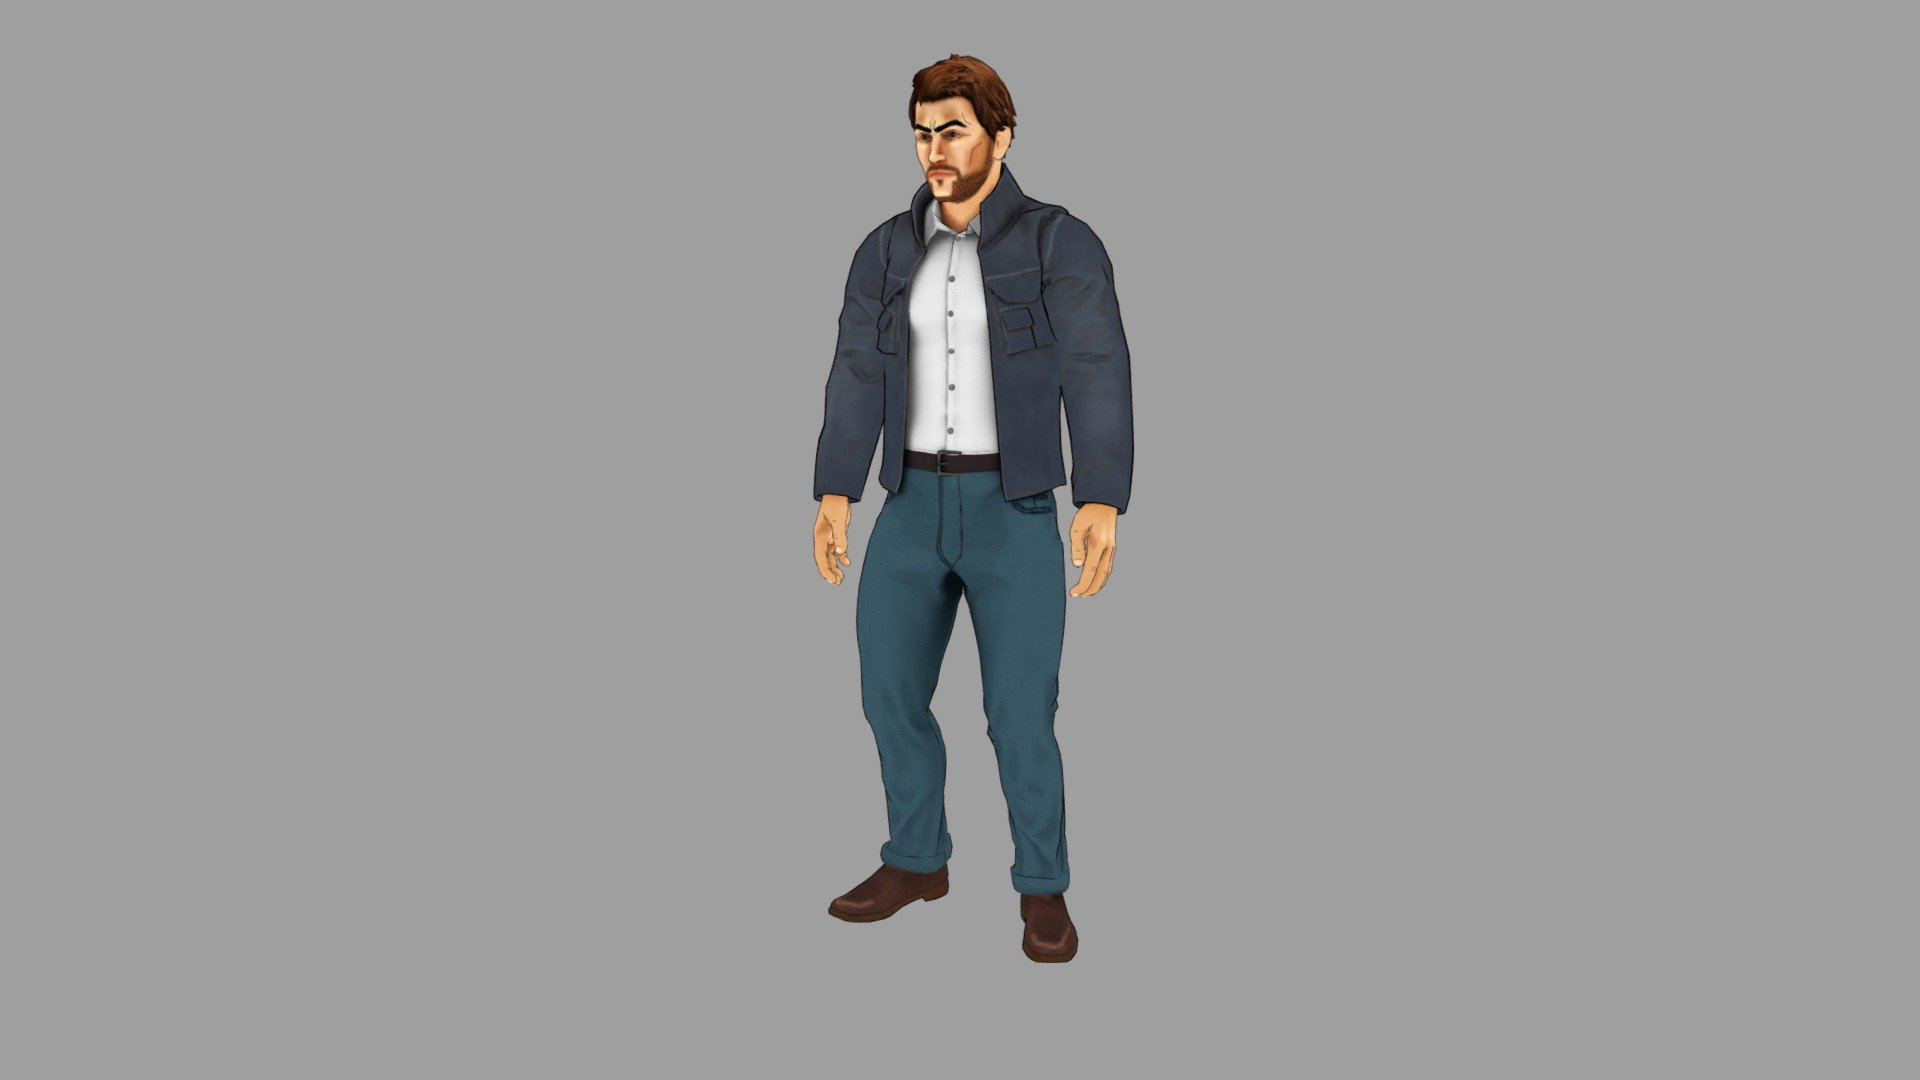 Animated lowpoly toon man compatible with mixamo animation library

2 animations: 

Walk

Idle

2 unlit color textures - Cartoon Man Character - Buy Royalty Free 3D model by mahrcheen 3d model